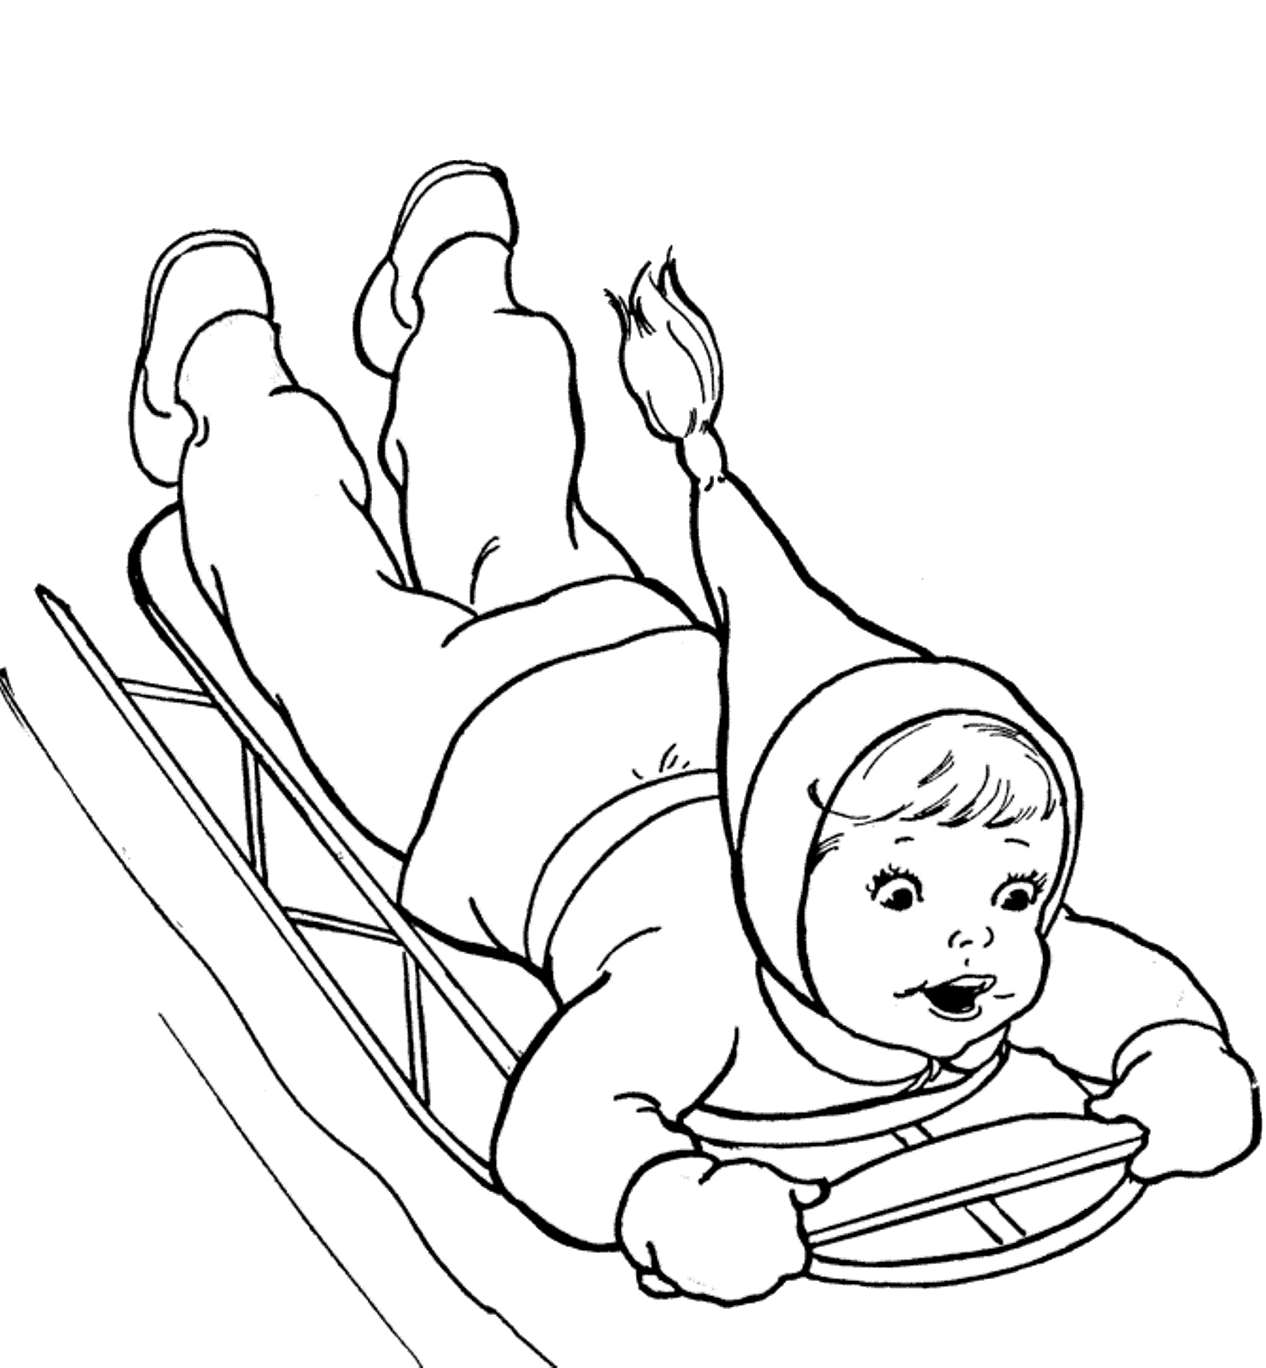 Sports Photograph Coloring Pages Kids